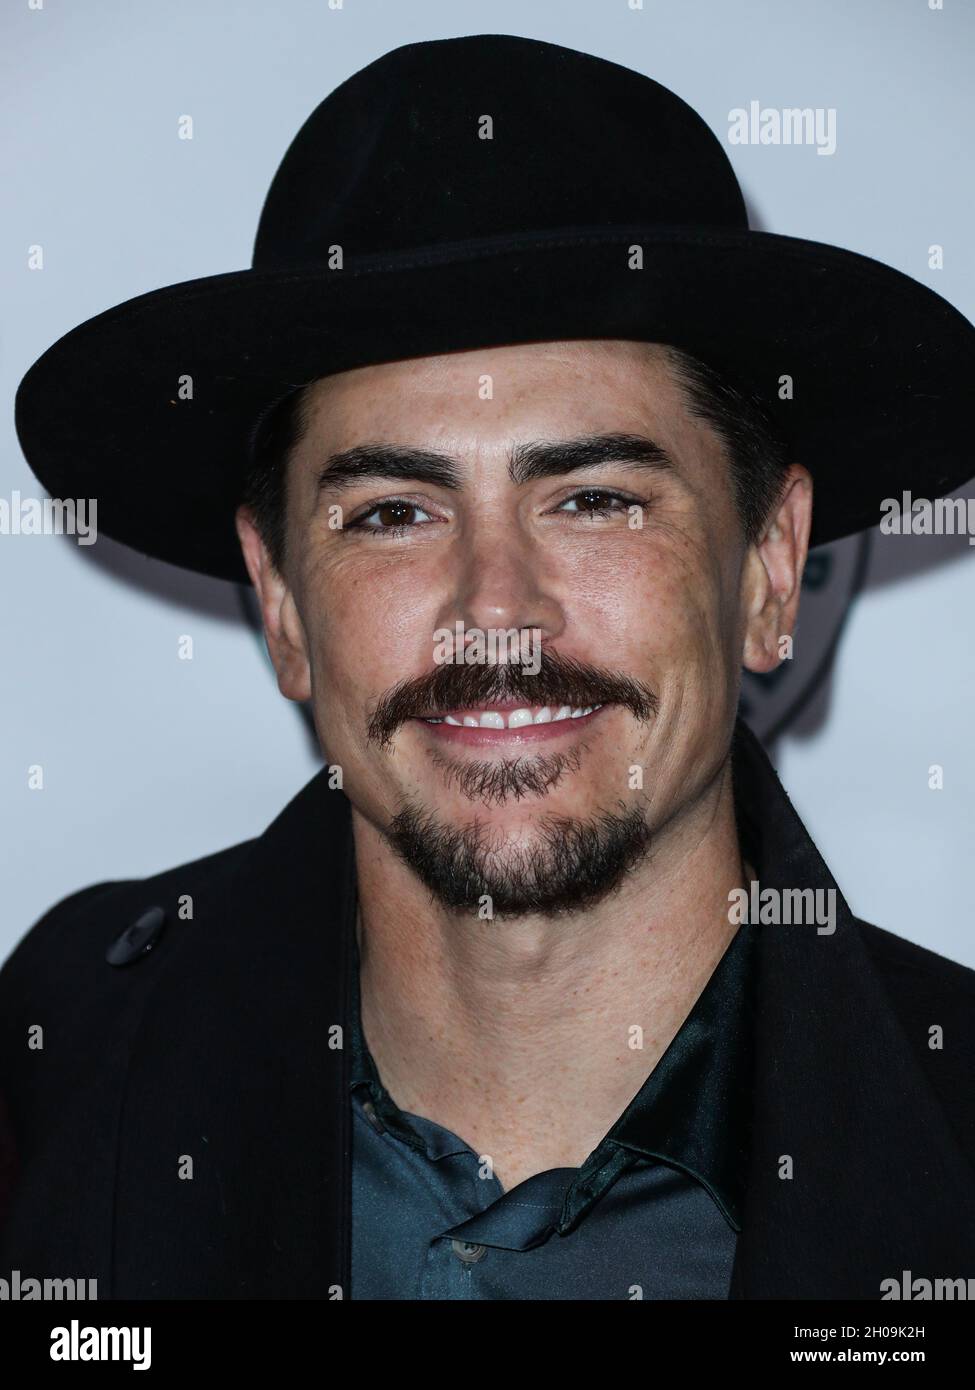 West Hollywood, United States. 11th Oct, 2021. WEST HOLLYWOOD, LOS ANGELES, CALIFORNIA, USA - OCTOBER 11: Actor Tom Sandoval arrives at Travel and GIVE's 4th Annual 'Travel With A Purpose' Fundraiser With Lisa Vanderpump (Fundraiser to Benefit Teletherapy Program and Communities in Haiti Affected by Earthquake) held at TOM TOM Restaurant and Bar on October 11, 2021 in West Hollywood, Los Angeles, California, United States. (Photo by Xavier Collin/Image Press Agency/Sipa USA) Credit: Sipa USA/Alamy Live News Stock Photo